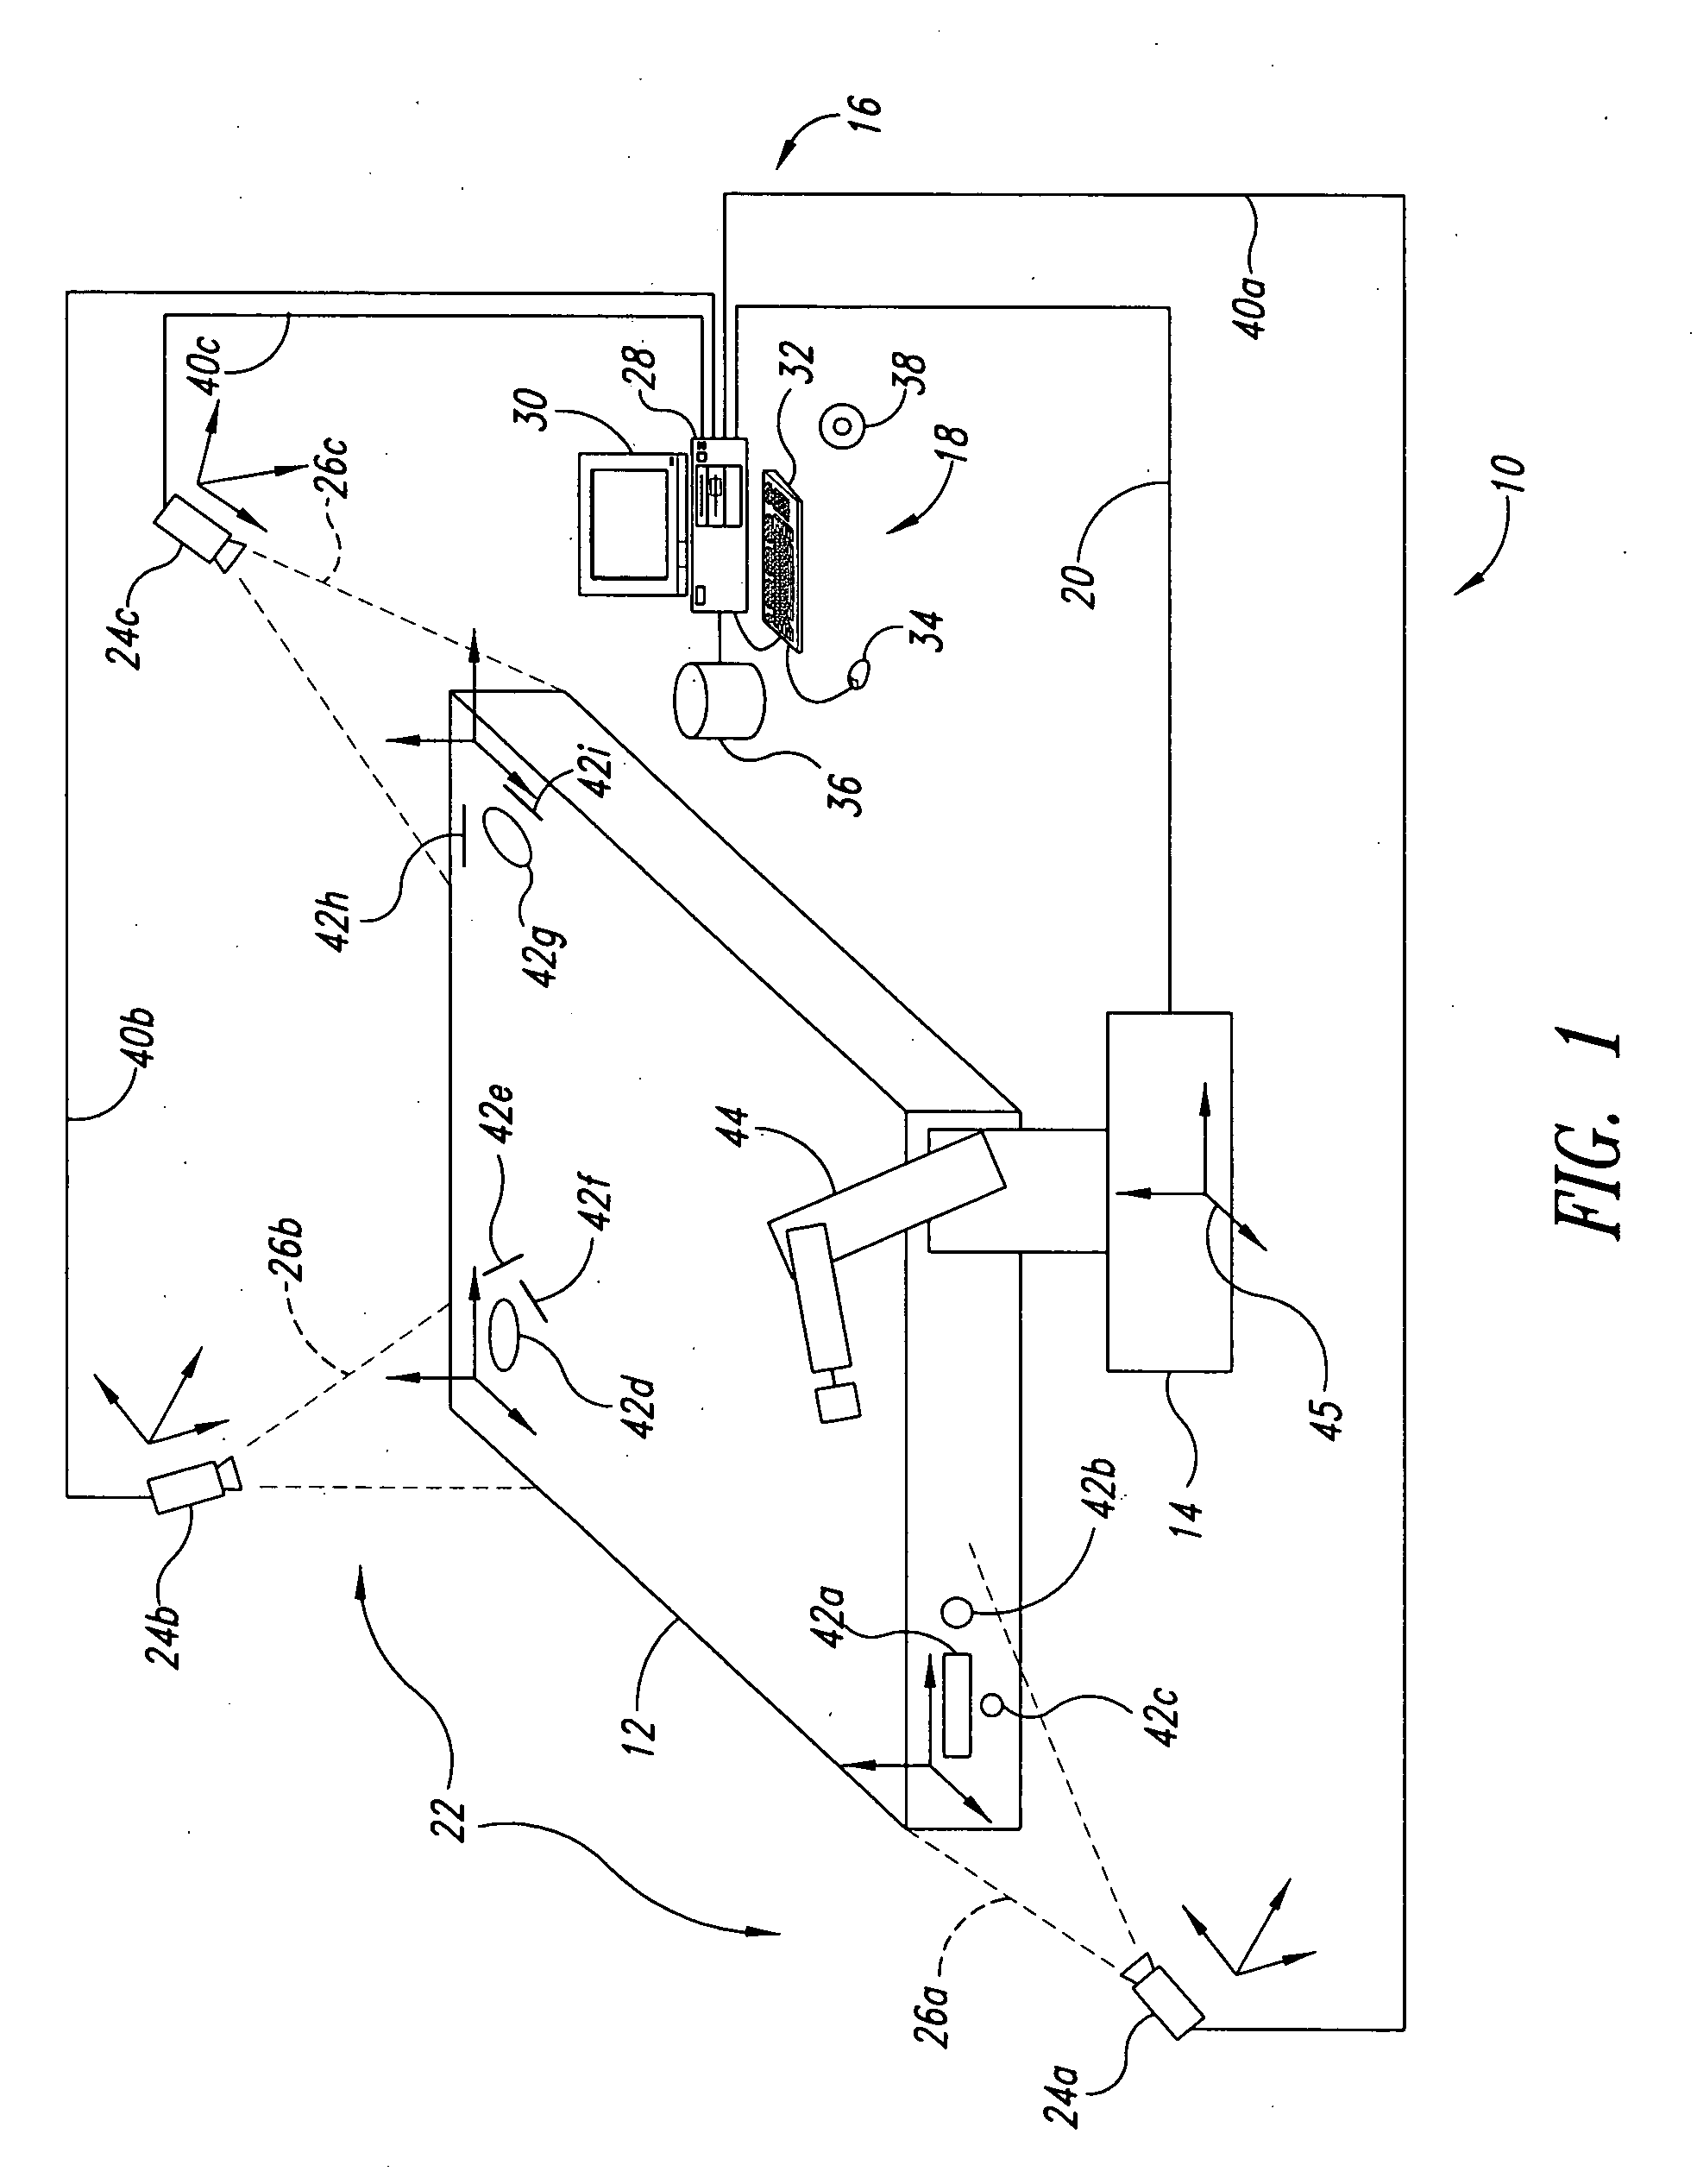 Method and apparatus for machine-vision